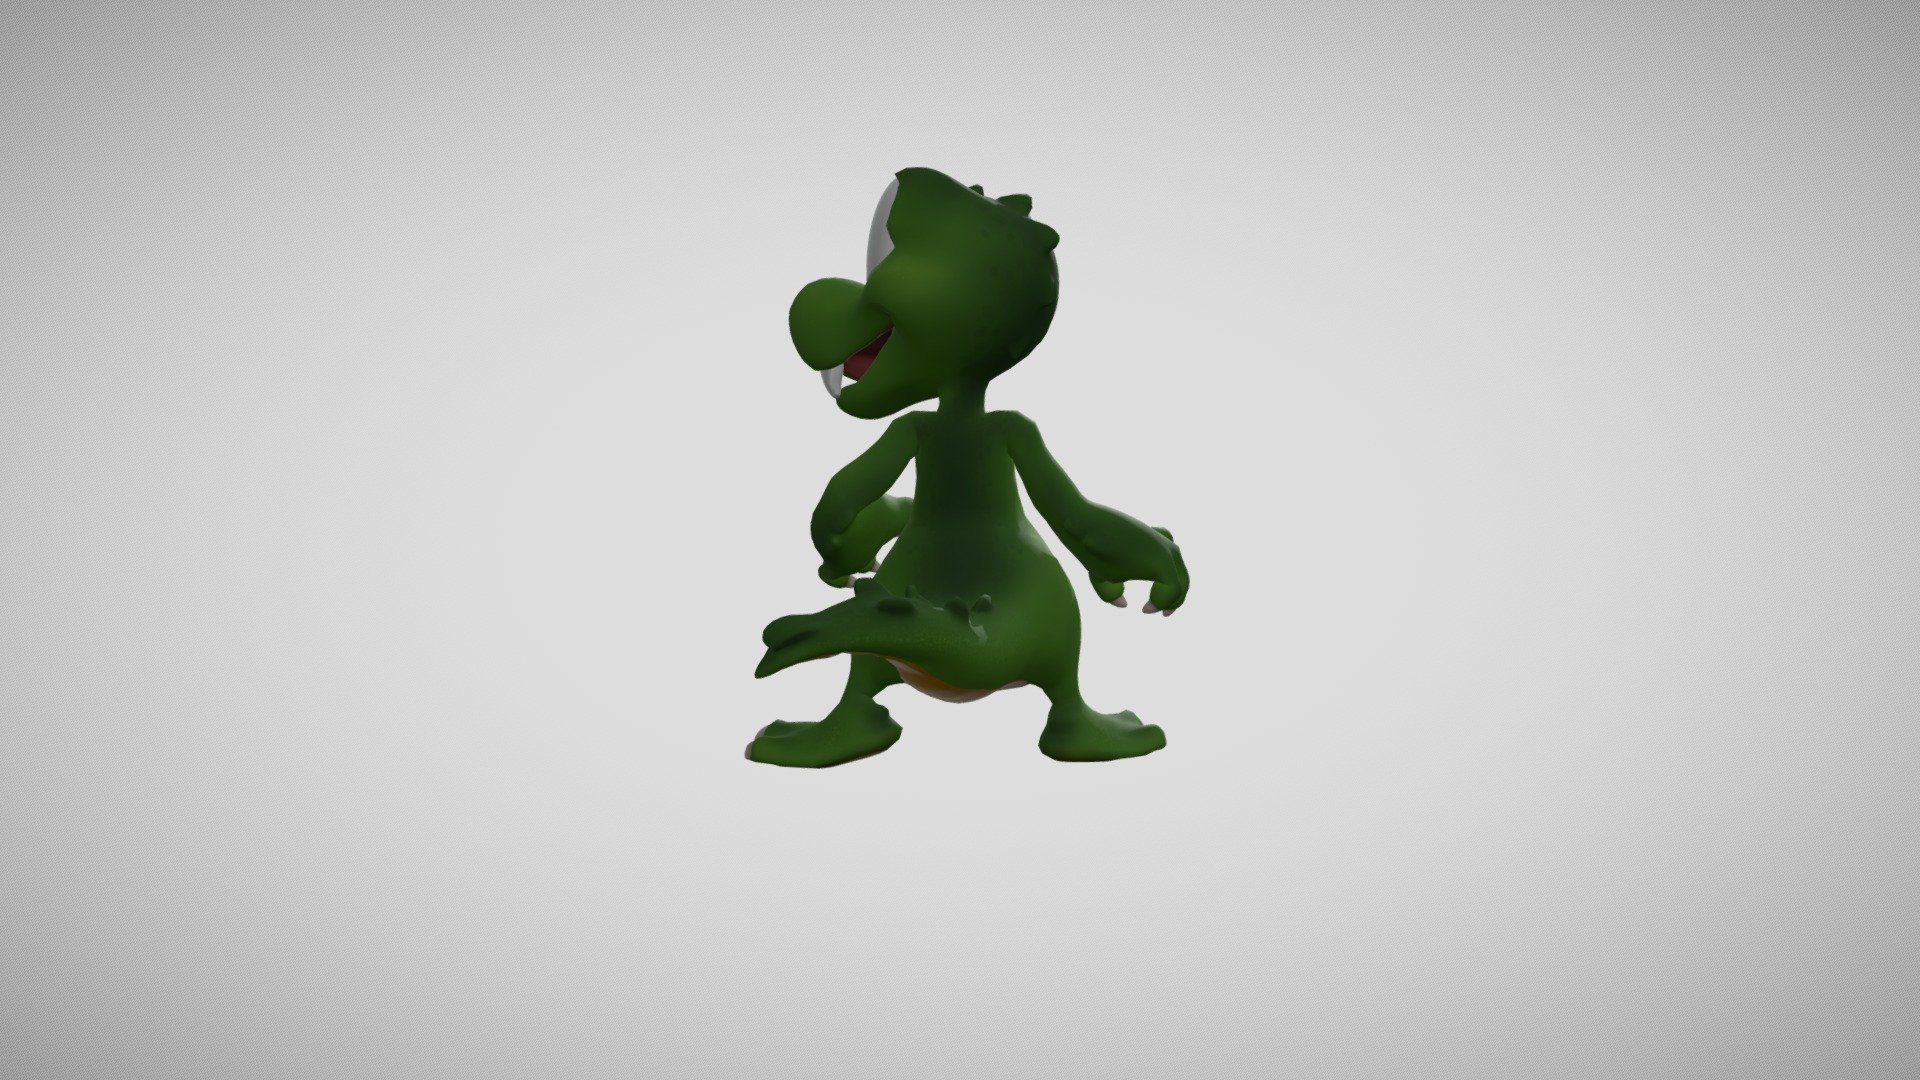 Croc, a character from an old ps1 game redesigned, modeled, textured and animated by me.
Watch the short video of our take on the croc intro remake: https://youtu.be/rKqPmxCmMcw - CROC - 3D model by Goldey 3d model